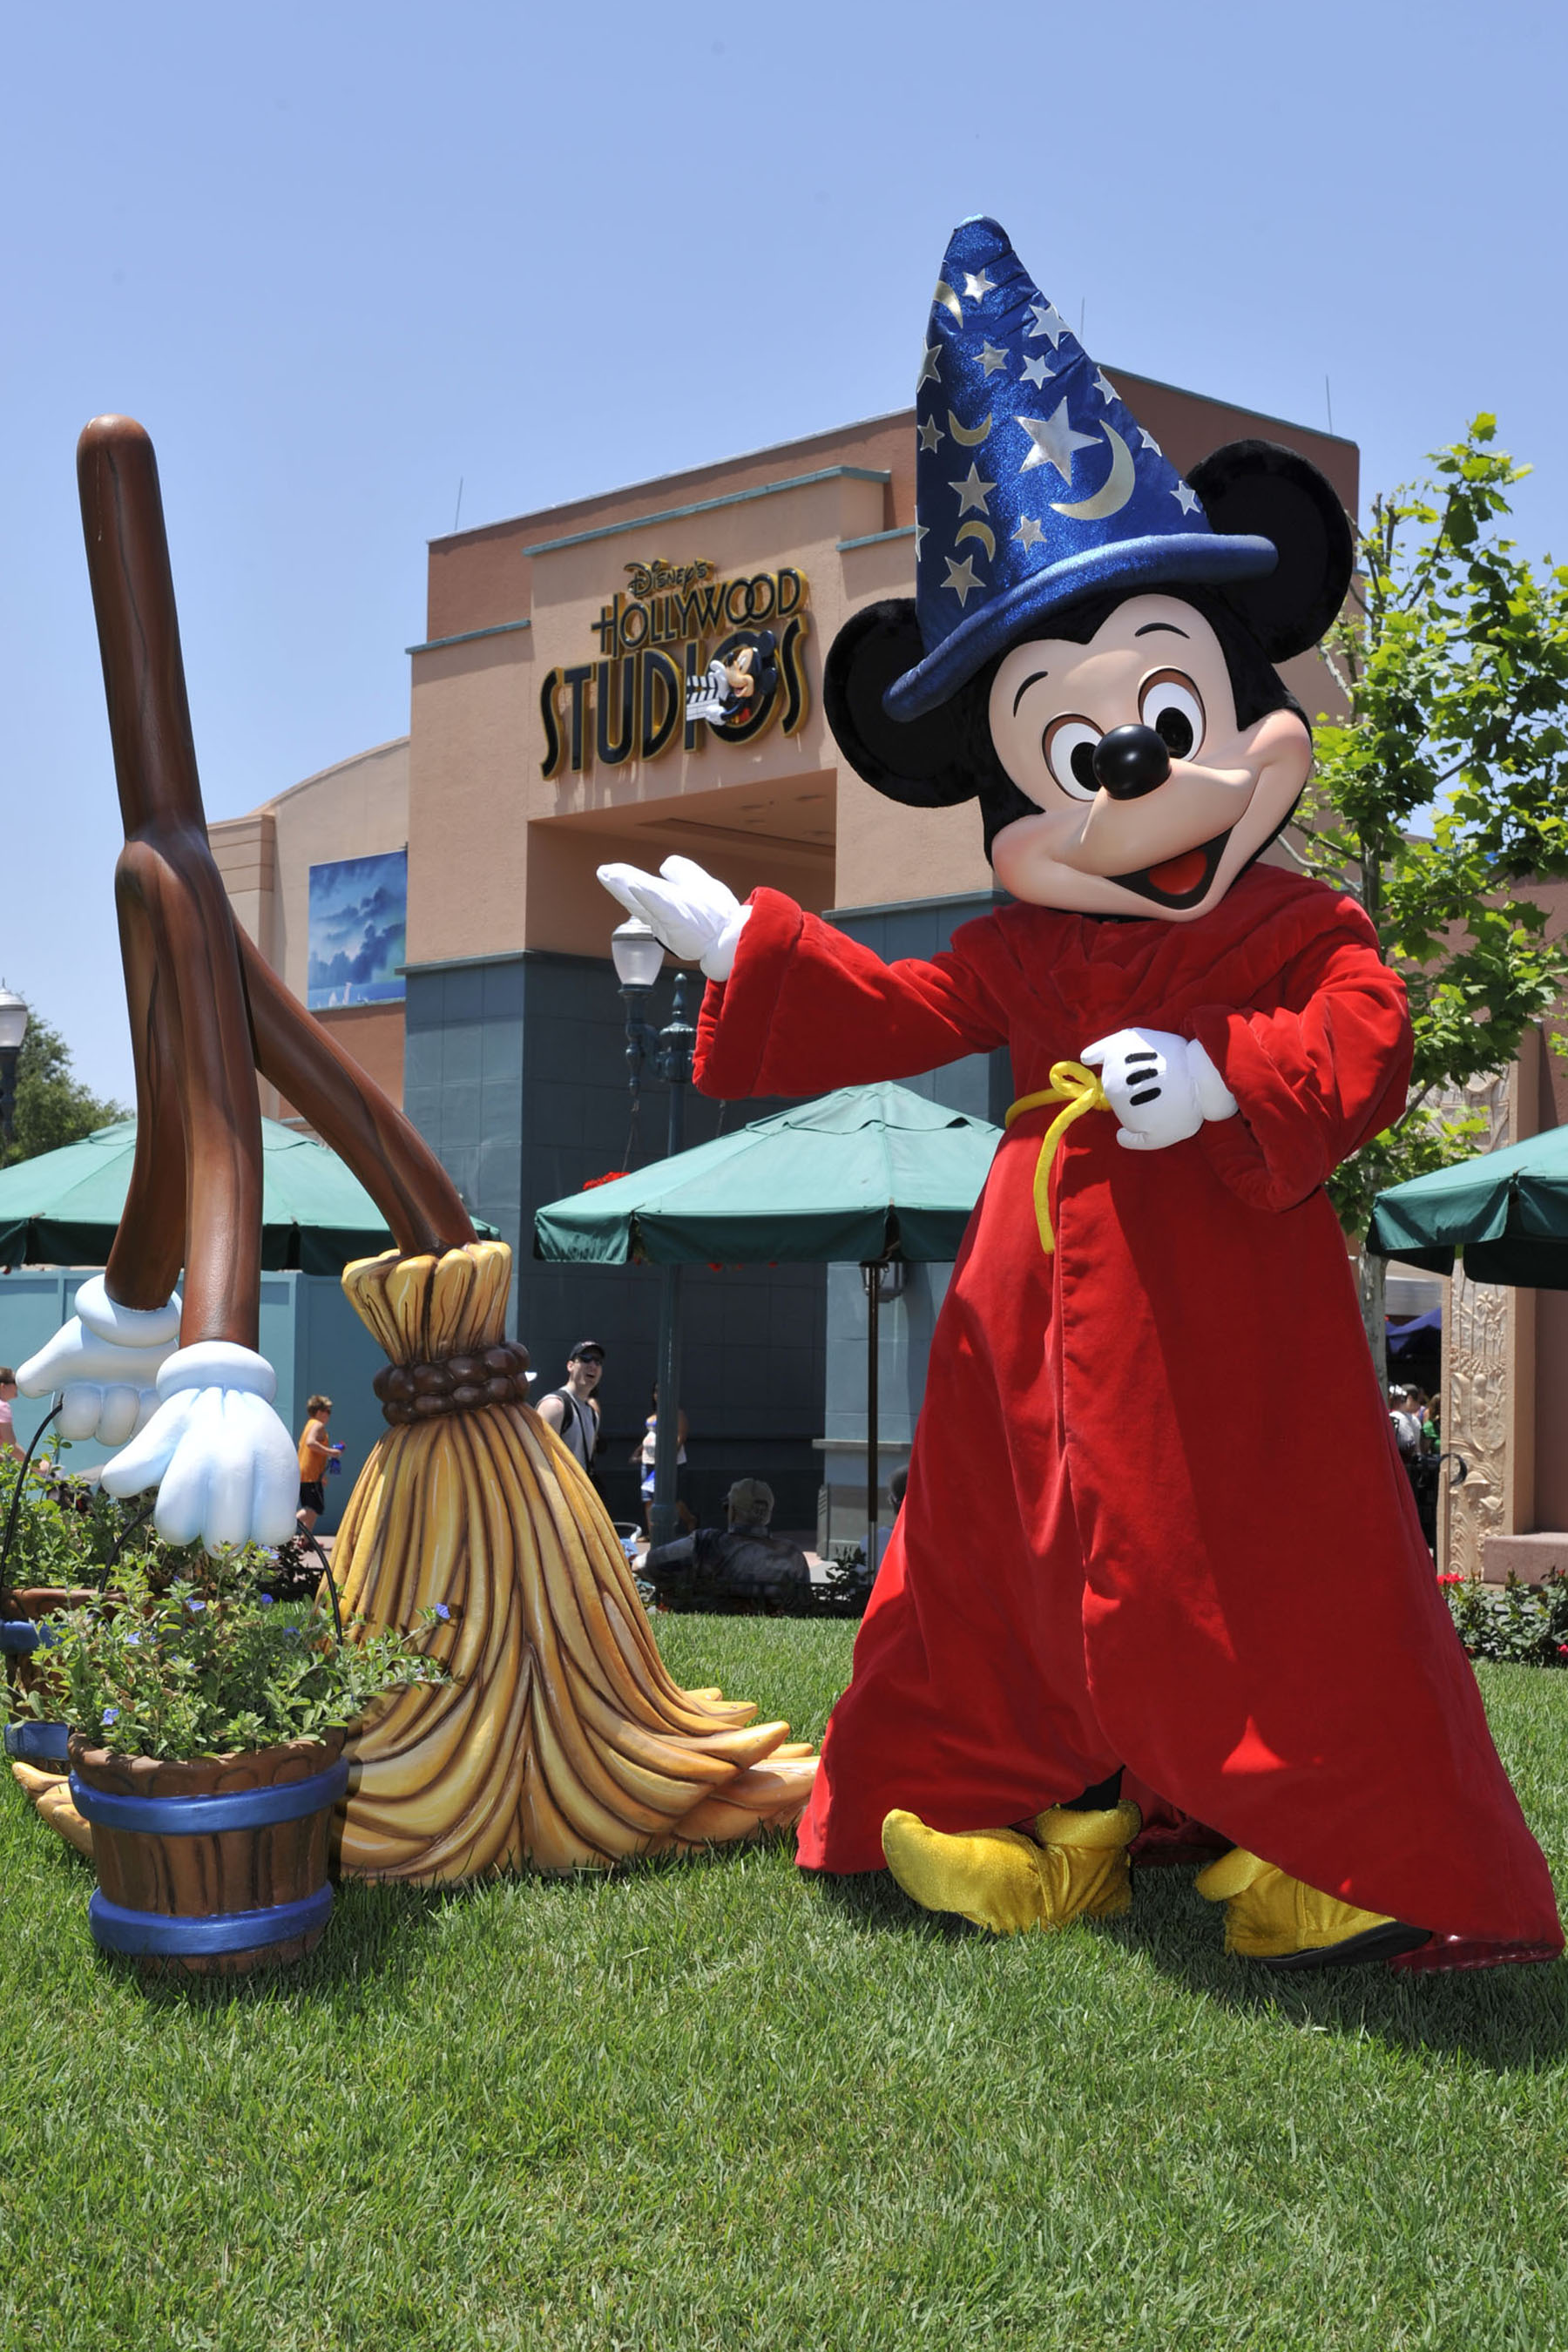 Disney's Hollywood Studios Sign with Mickey Mouse | The Disney Blog